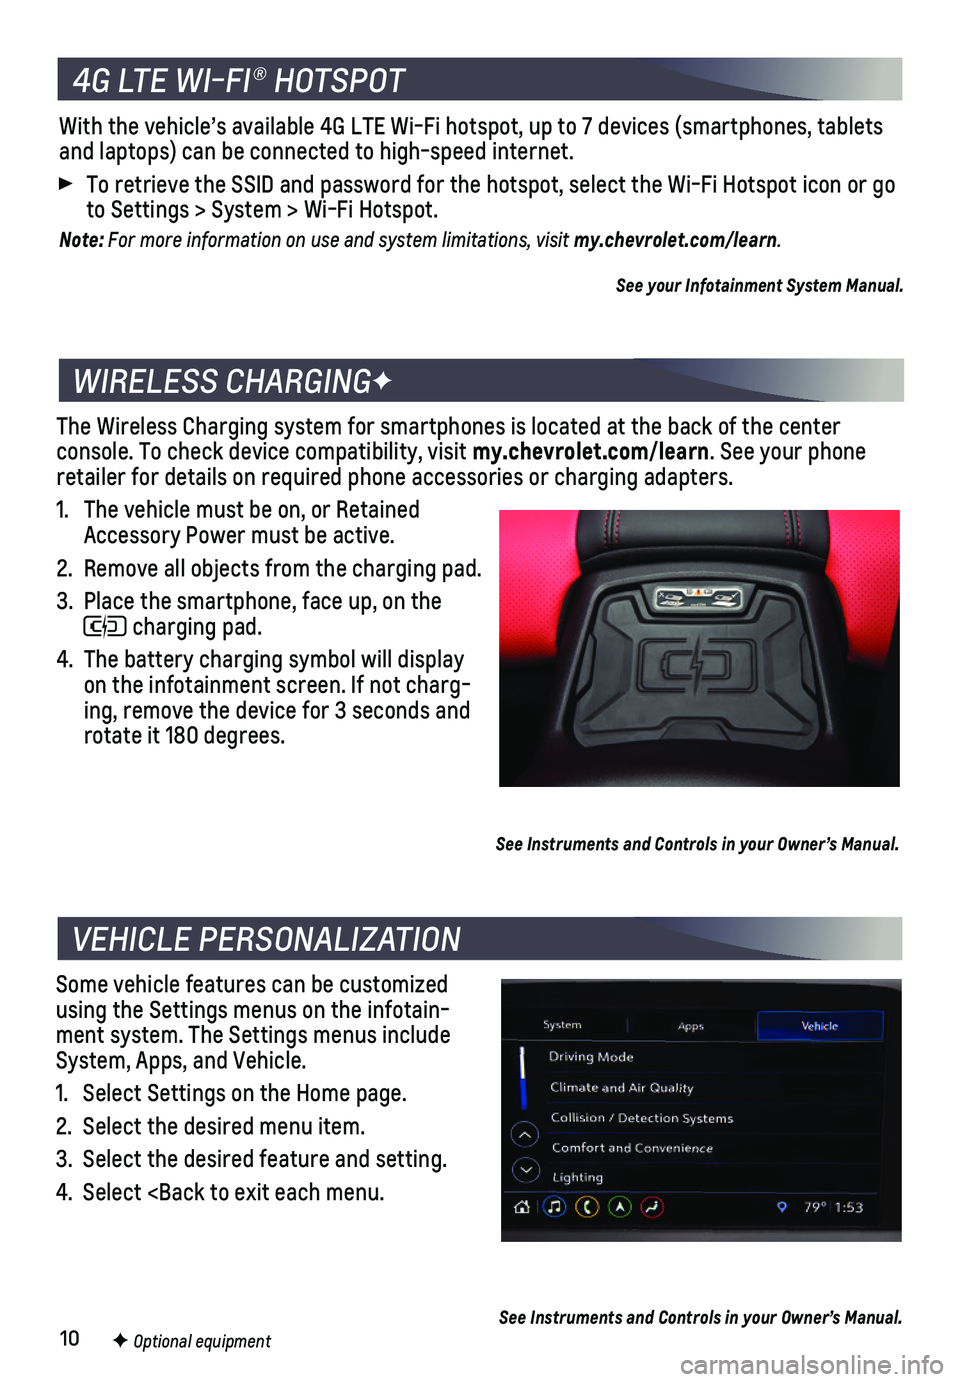 CHEVROLET CAMARO 2019  Get To Know Guide 10
The Wireless Charging system for smartphones is located at the back of t\
he center  
console. To check device compatibility, visit my.chevrolet.com/learn. See your phone retailer for details on re